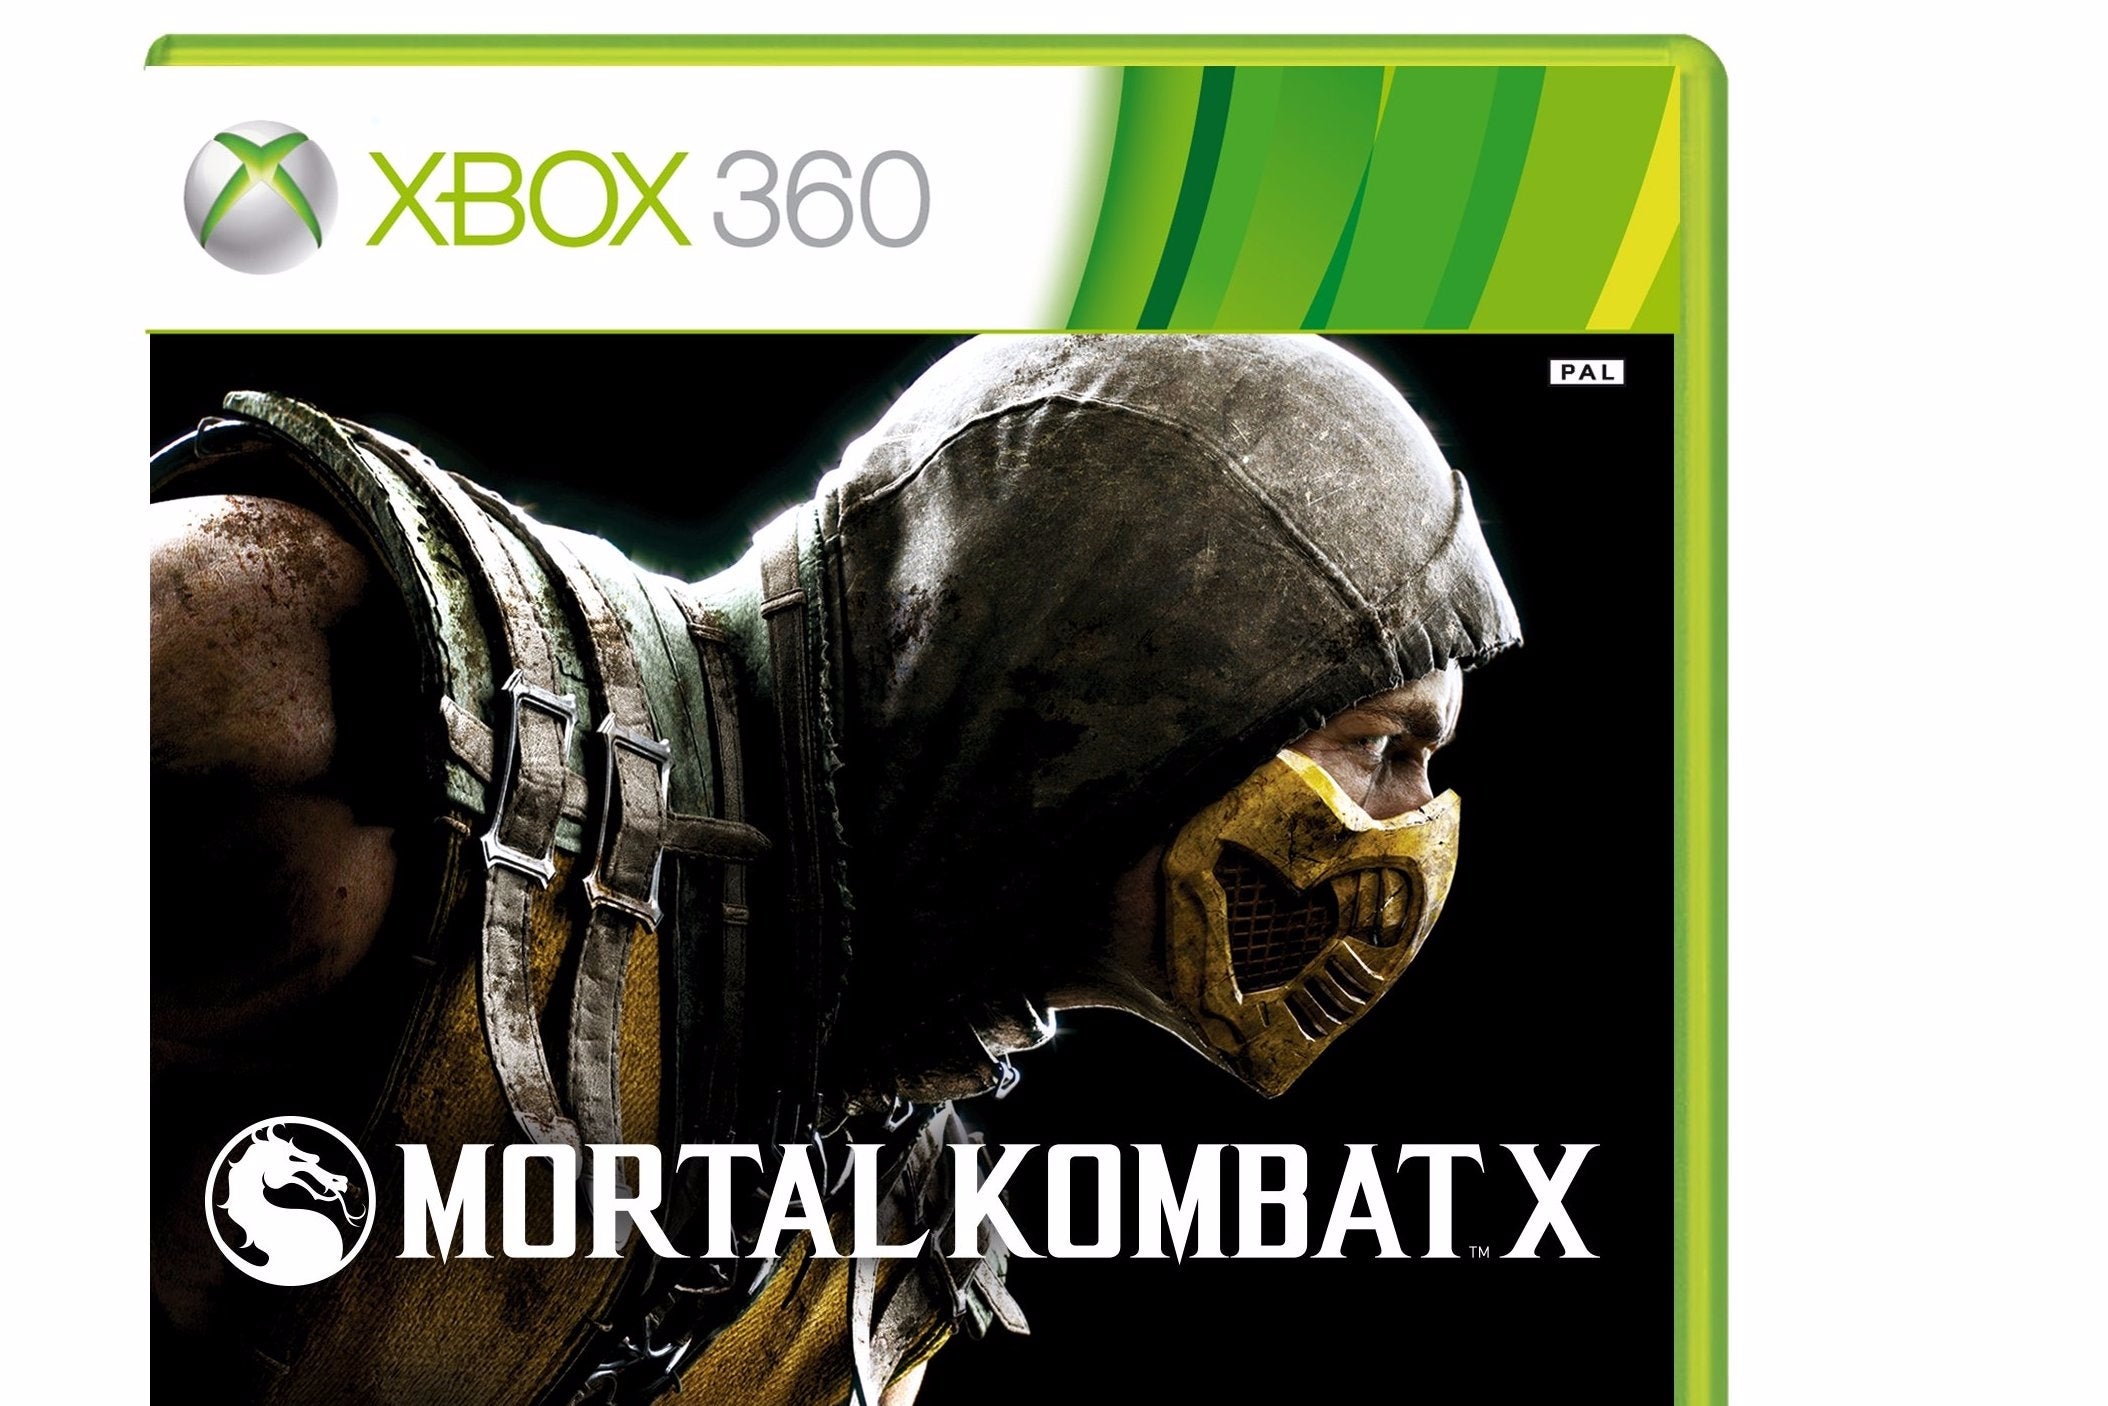 Image for Looks like Mortal Kombat X PS3, Xbox 360 versions are delayed again